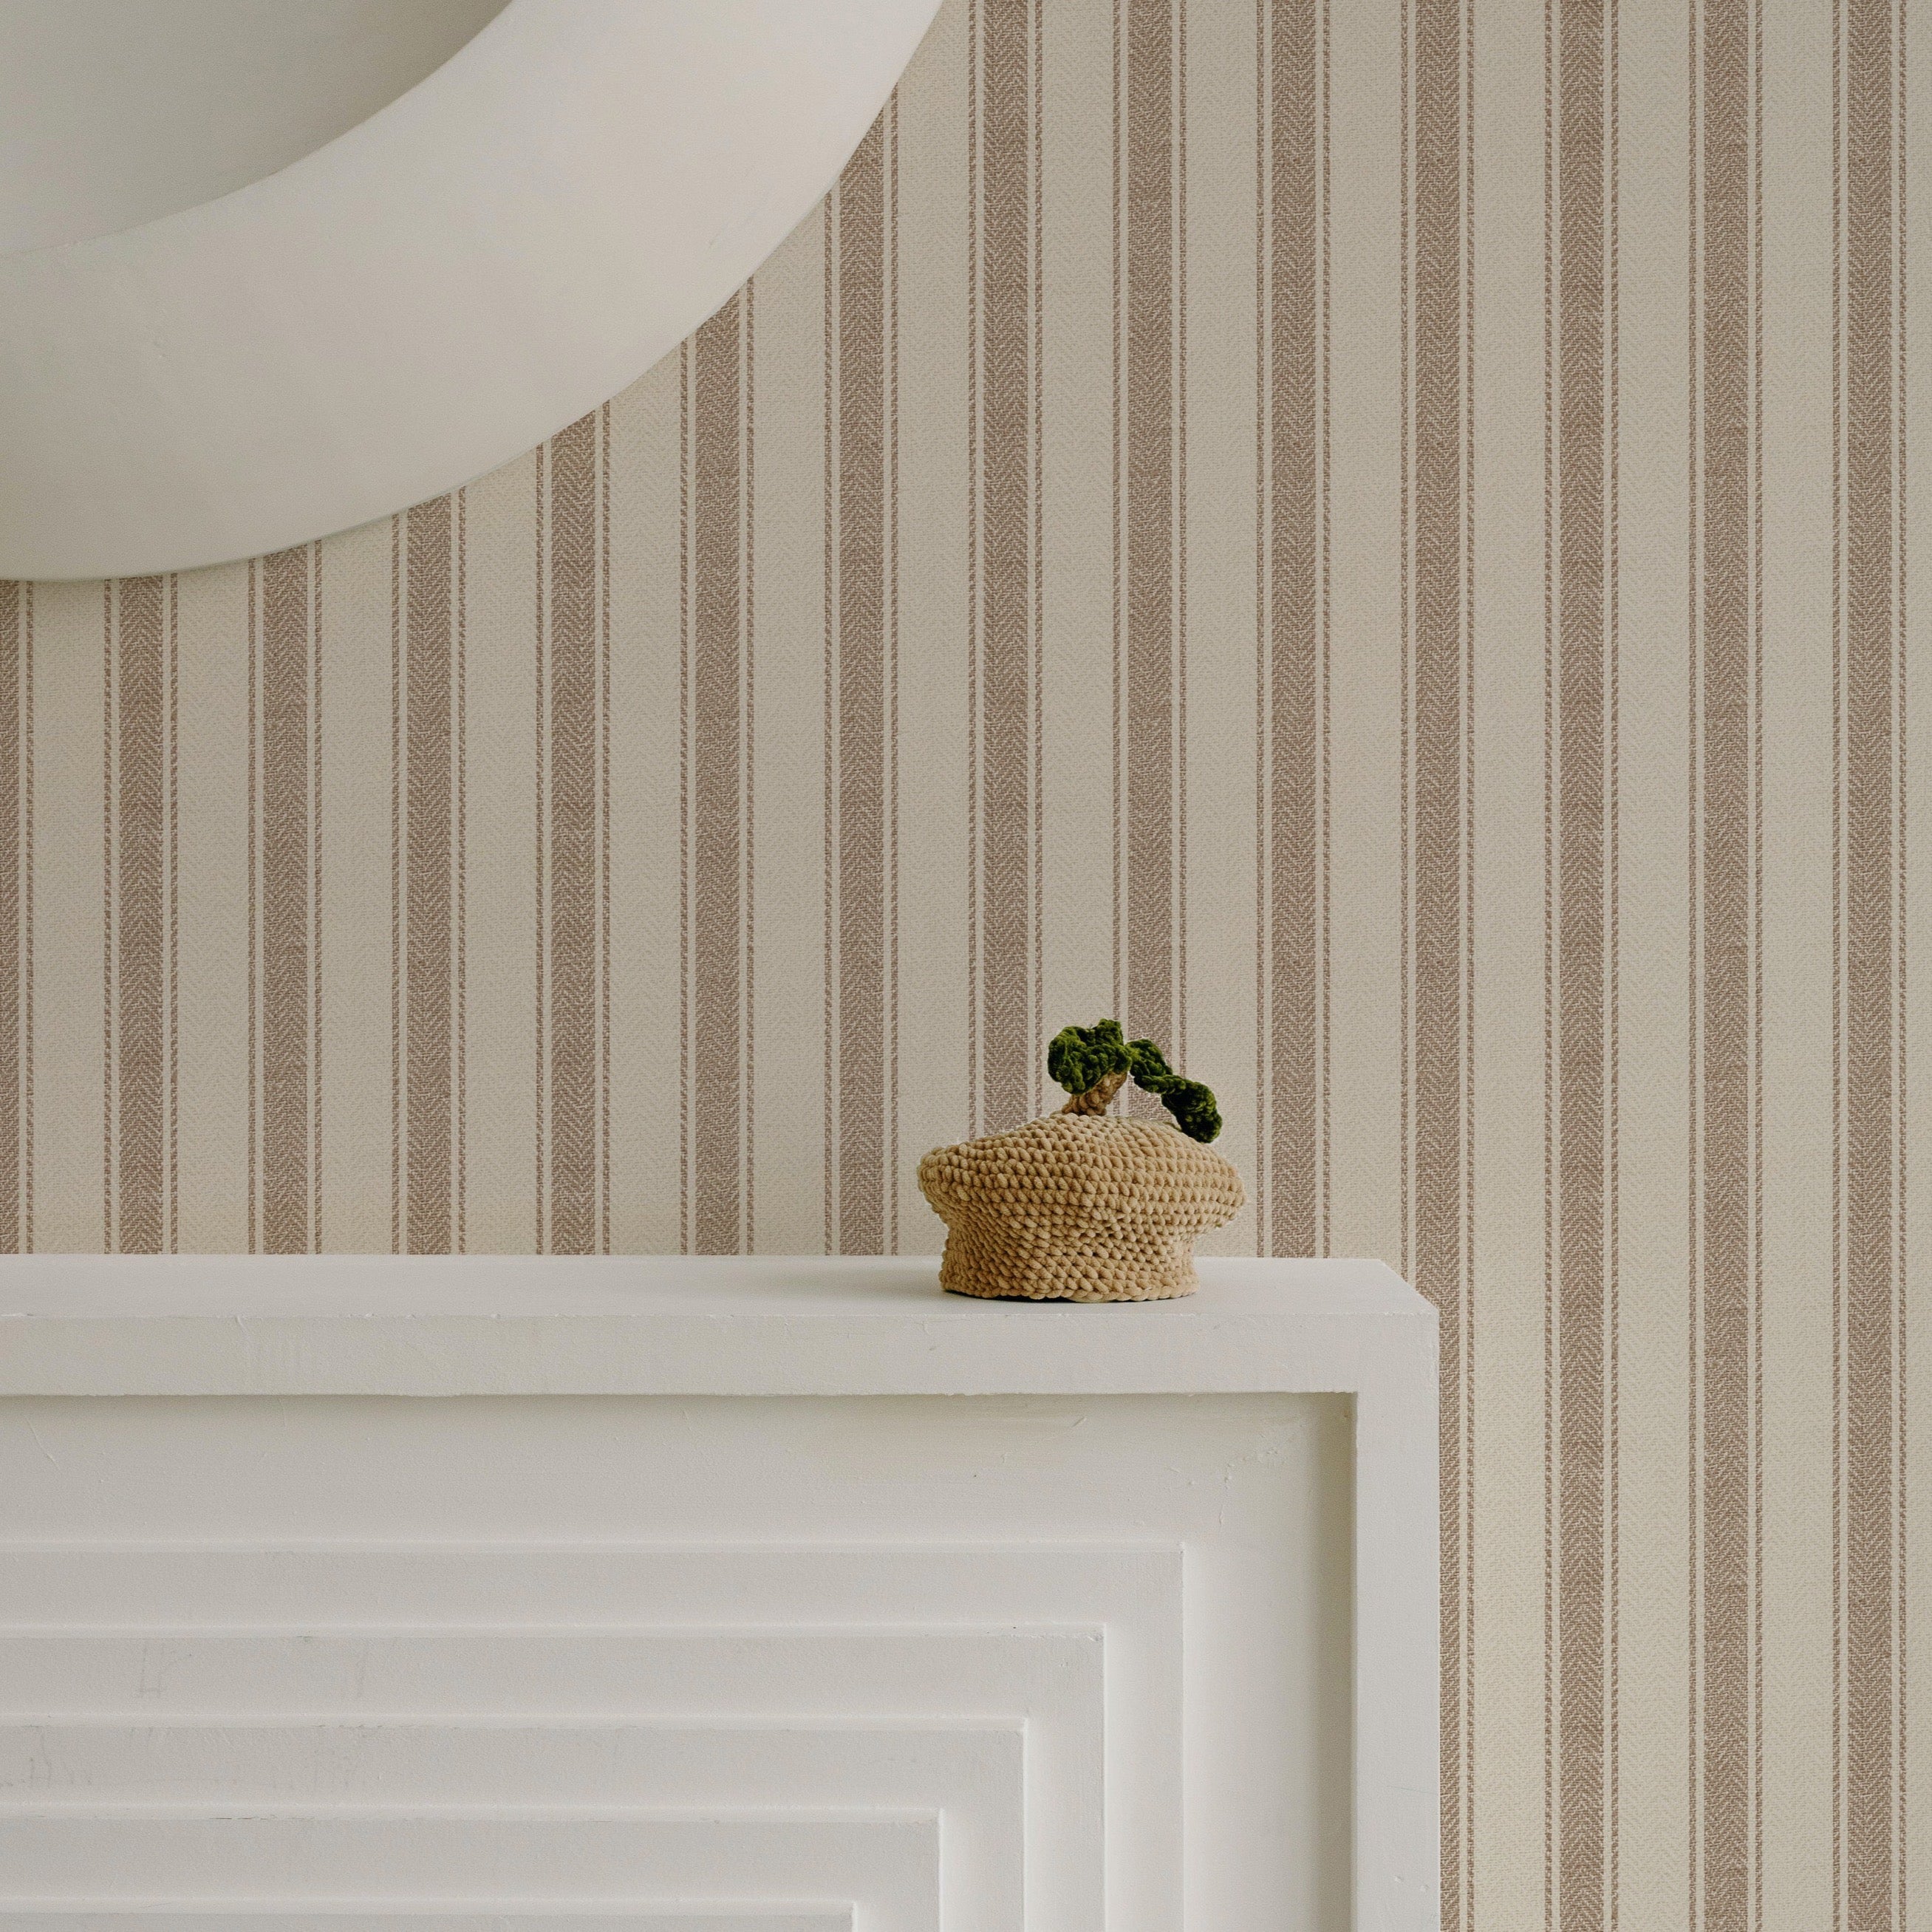 A minimalist detail shot showing the Striped Fabric Wallpaper above a white mantelpiece, where a small woven basket with a houseplant sits, highlighting the wallpaper's subtle texture and elegant stripe pattern.